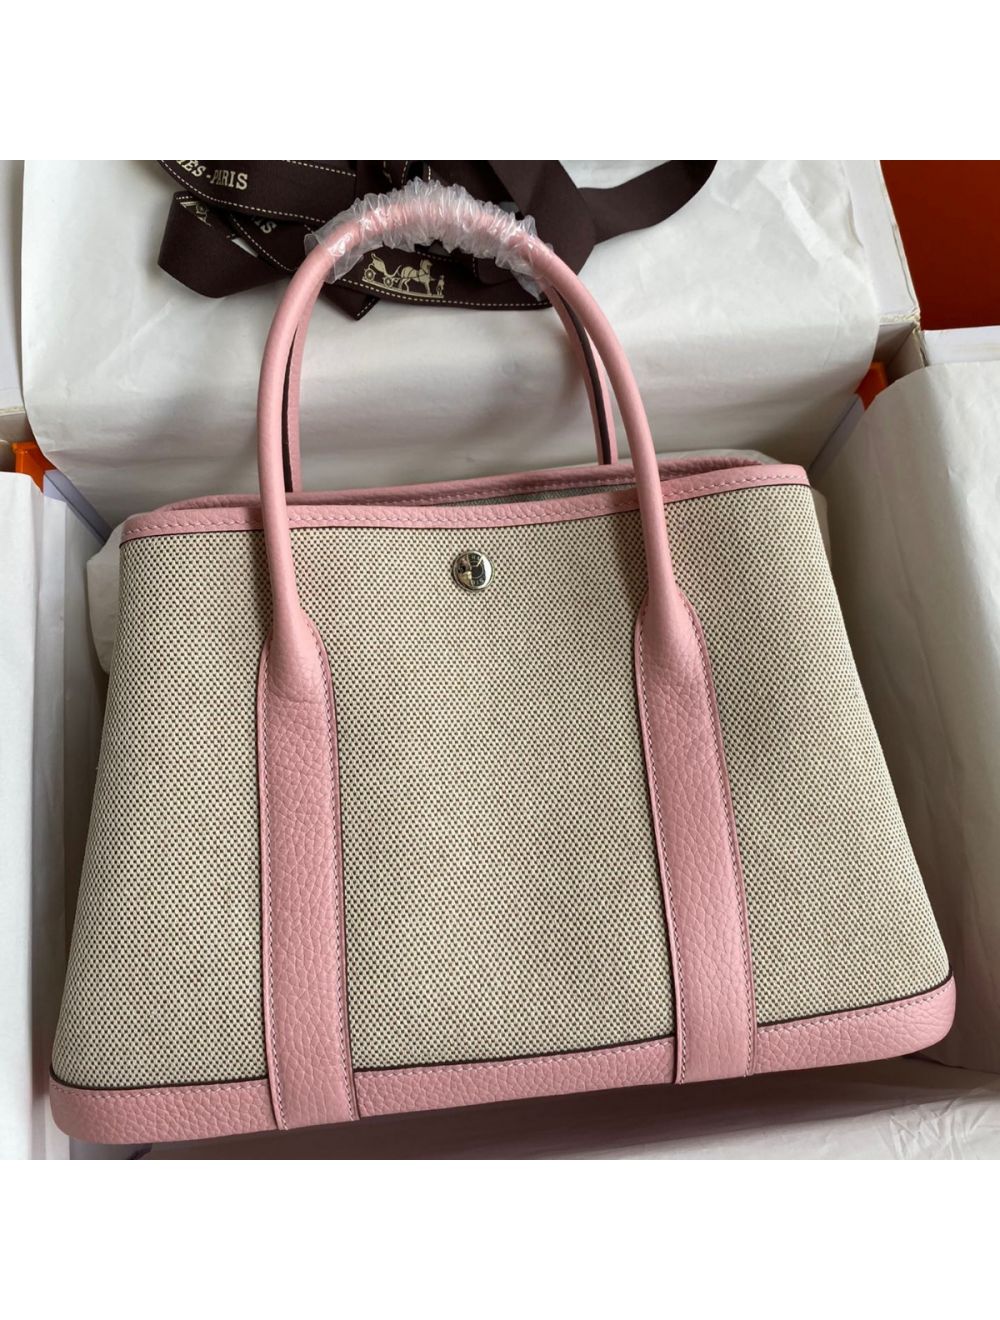 Replica Hermes Garden Party 30 Handmade Bag in Toile and Pink Leather